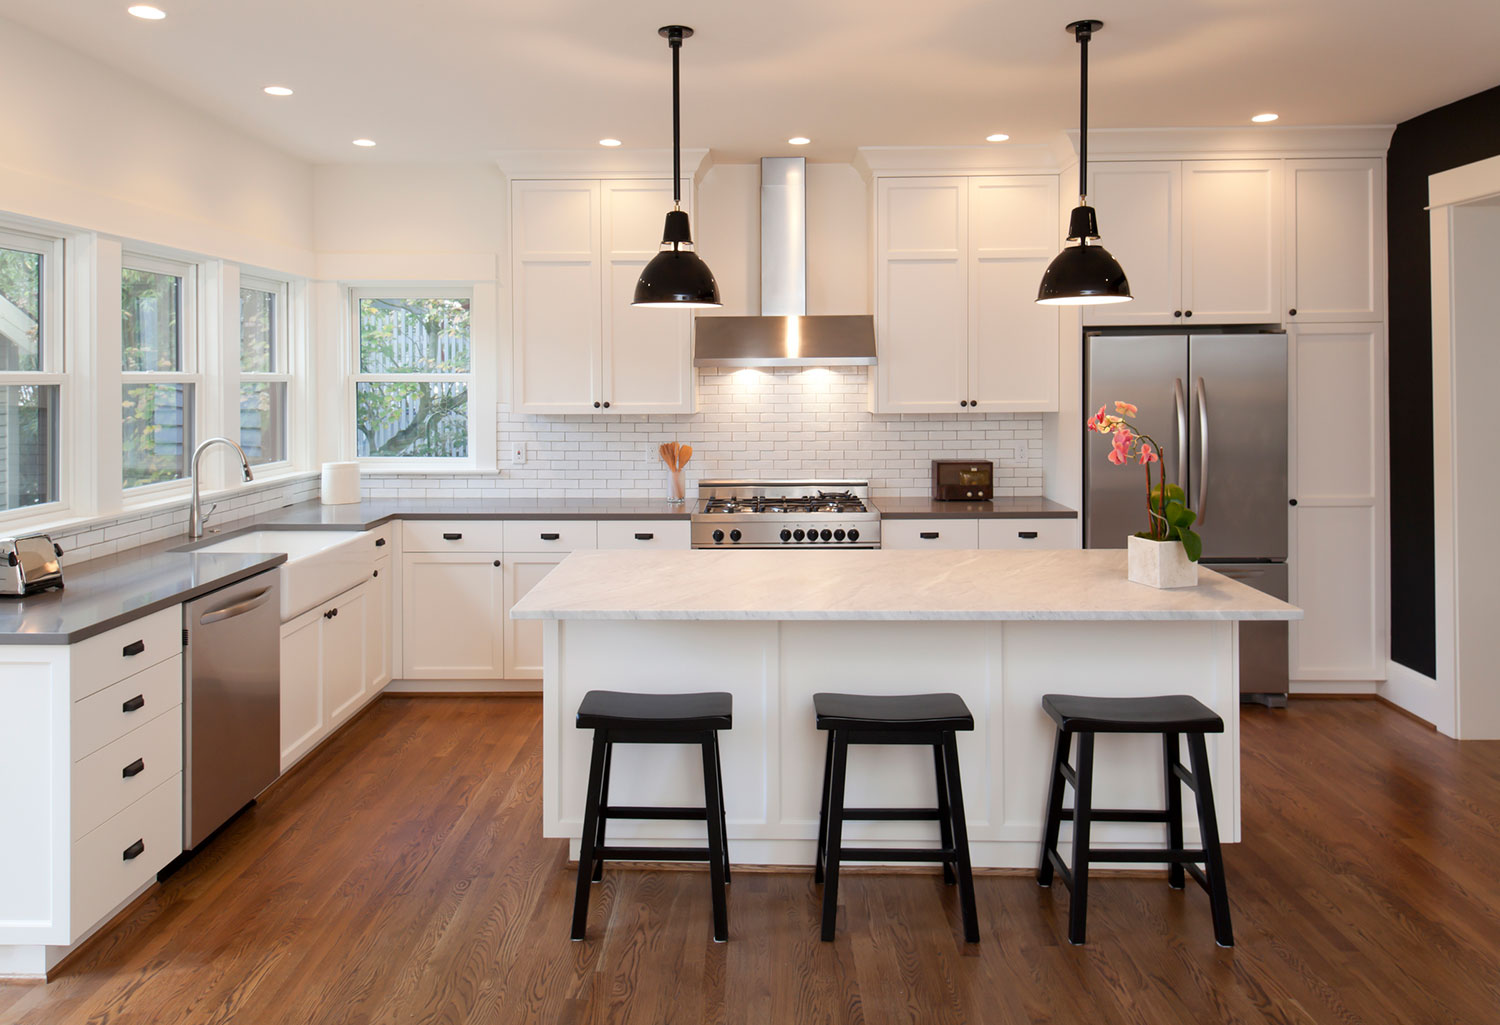 3 Ideas For Designing a Sustainable Kitchen - Kitchen Renovation - Custom cabinetry - Custom Kitchens